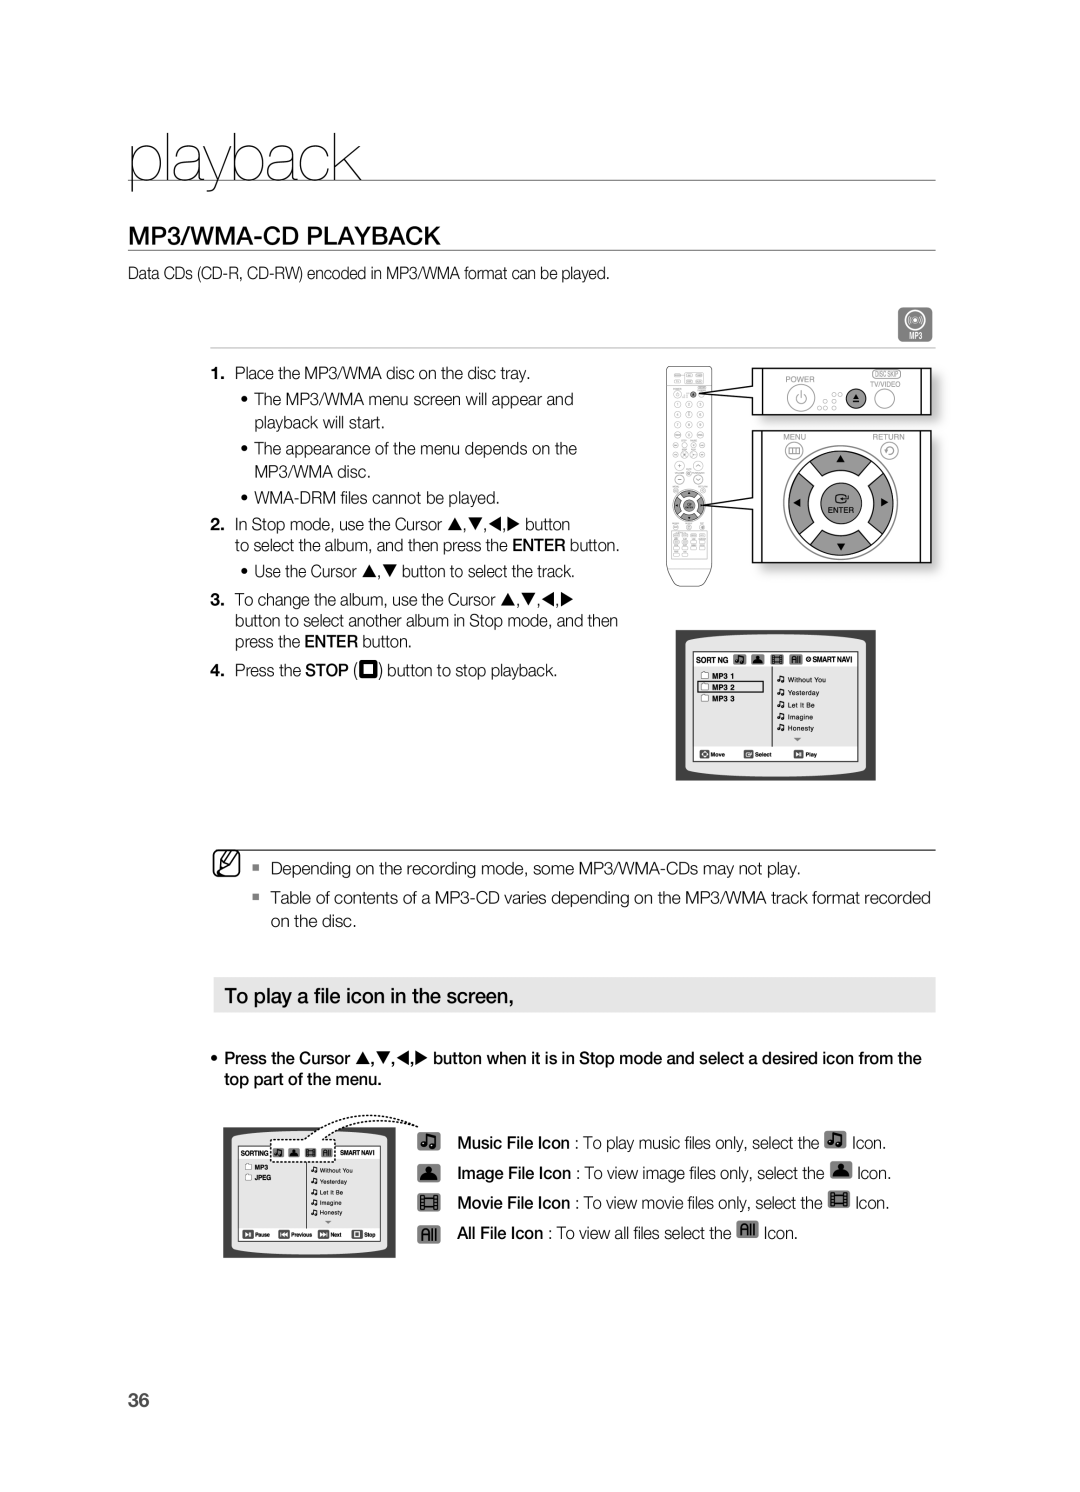 Samsung HT-TZ515 user manual playback, MP3/WMA-CDPLAYBACK, To play a file icon in the screen 